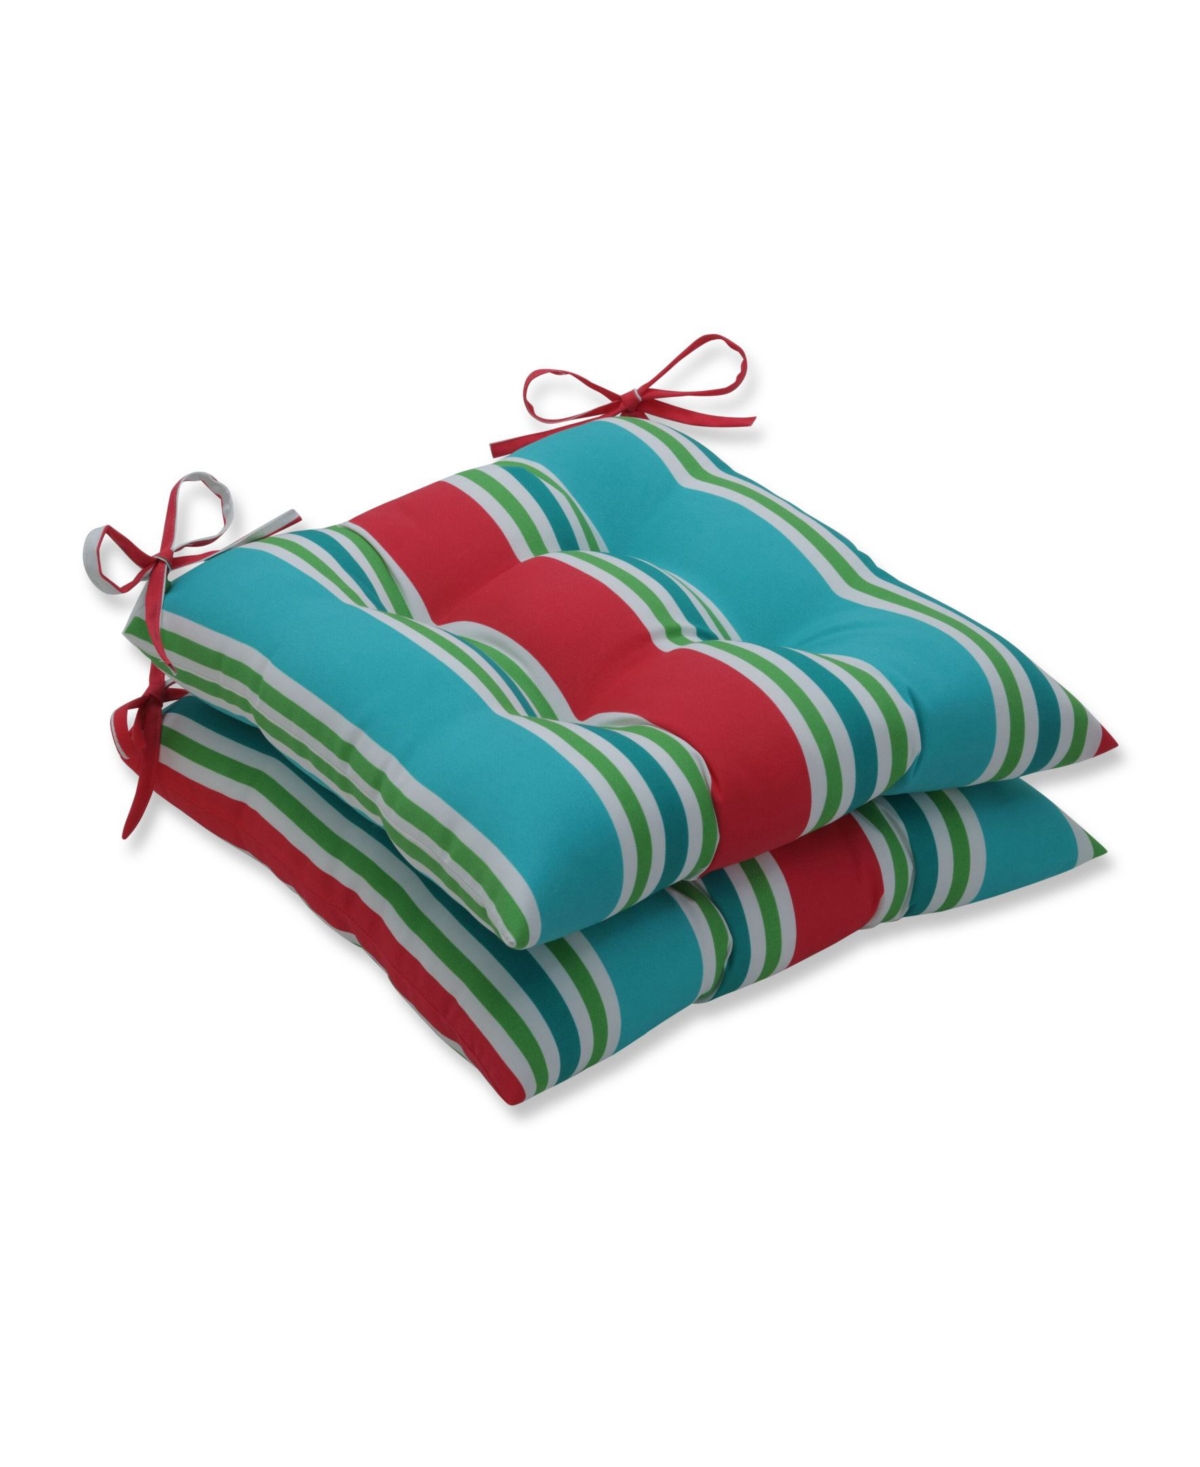 Printed 18.5" x 19" Tufted Outdoor Chair Pad Seat Cushion 2-Pack - Red Stripe